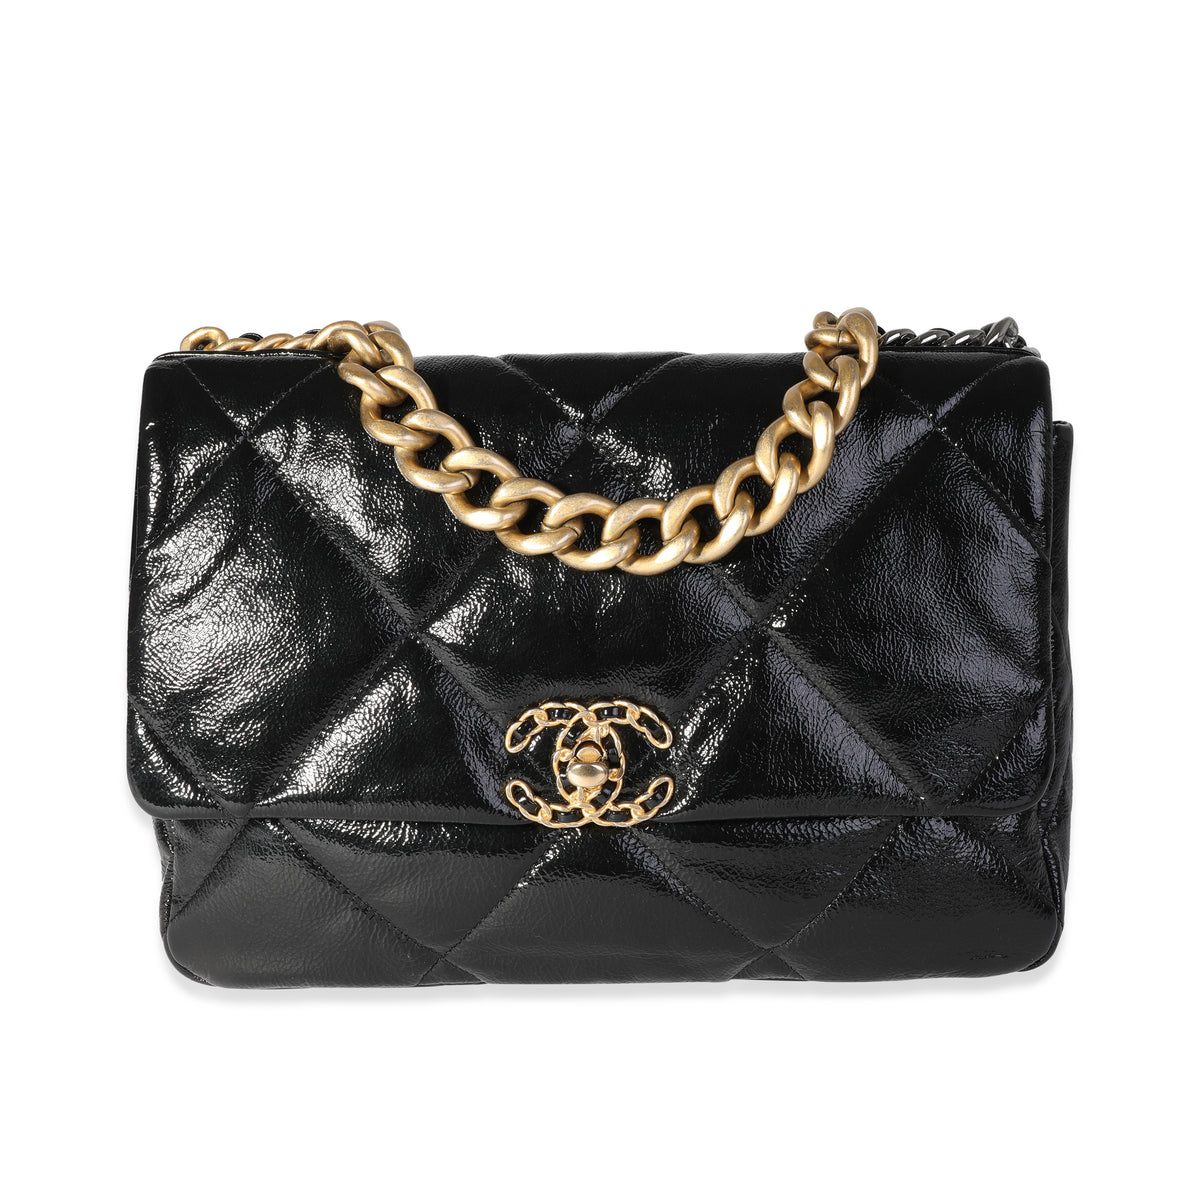 CHANEL flap bag in black wool and aged leather - VALOIS VINTAGE PARIS